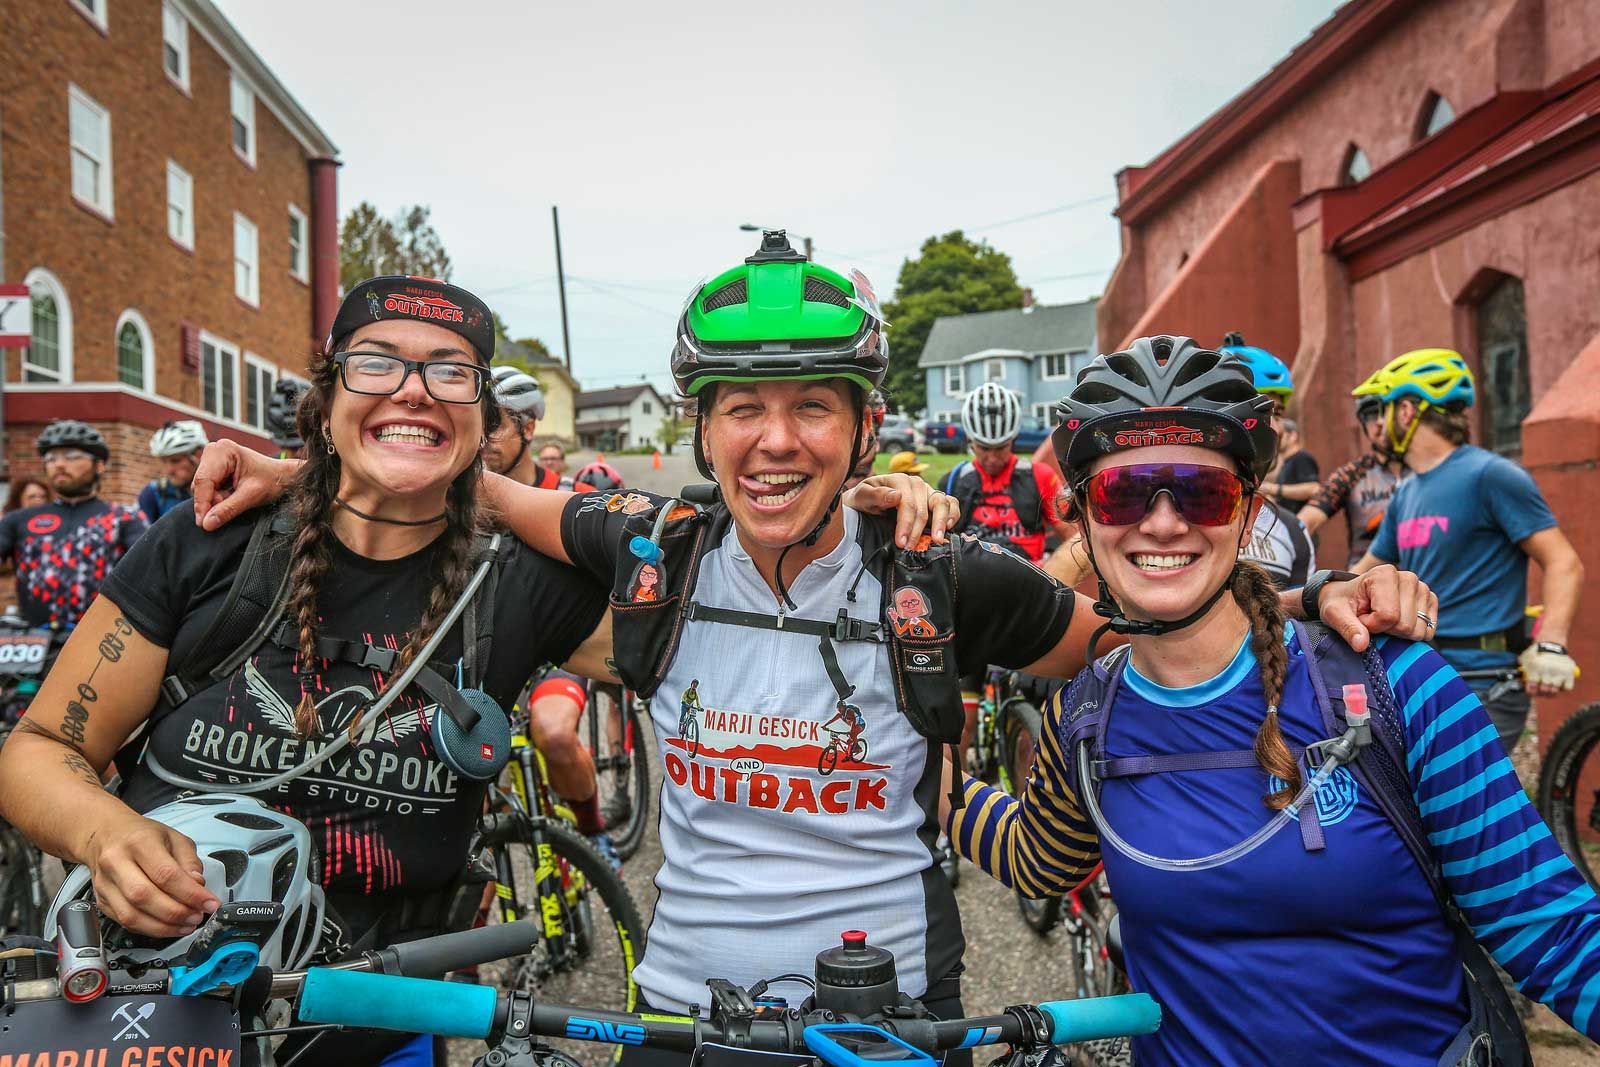 Houchin (Left), Jenny Acker (center), and Jill Martindale at the start of the 200-mile Marji Gesick race in 2019.